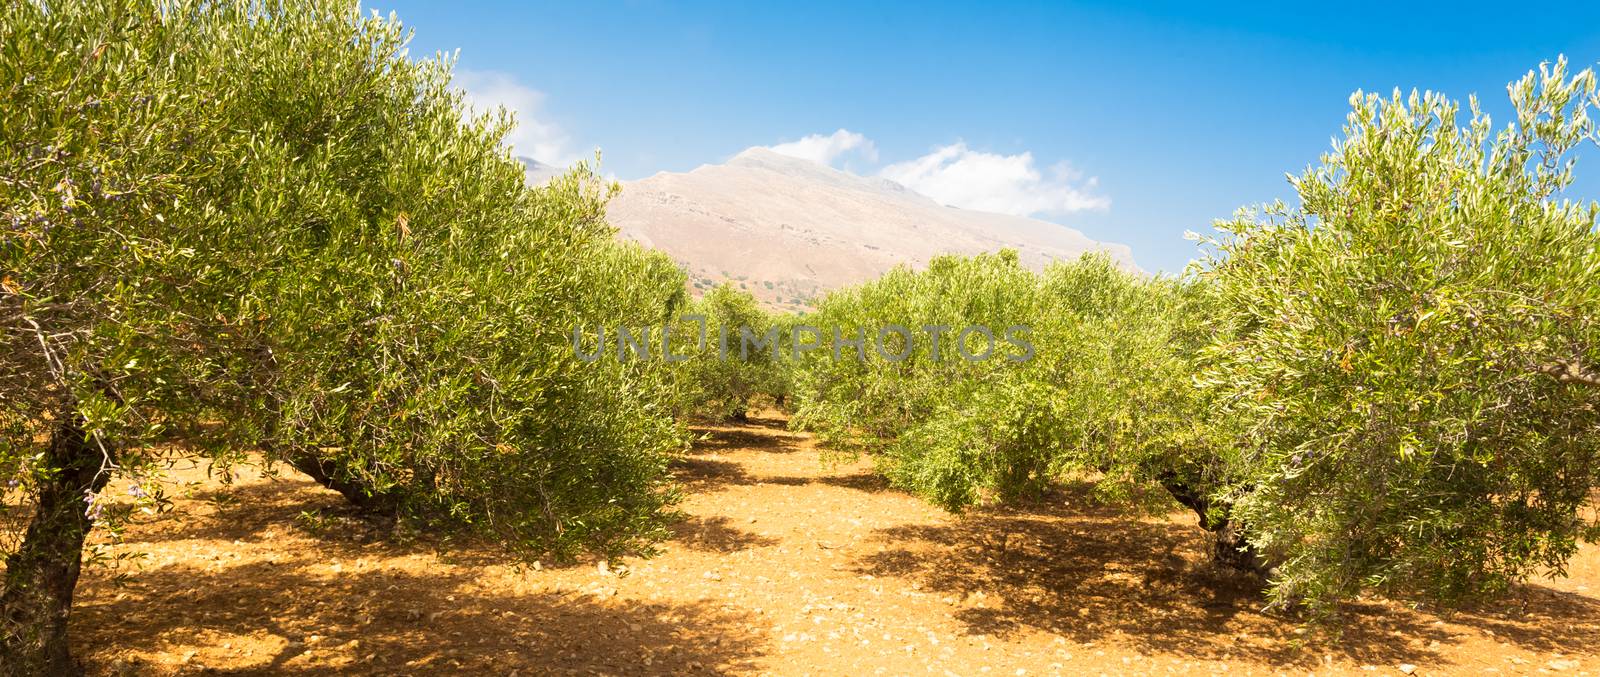 Olive grove by kasto